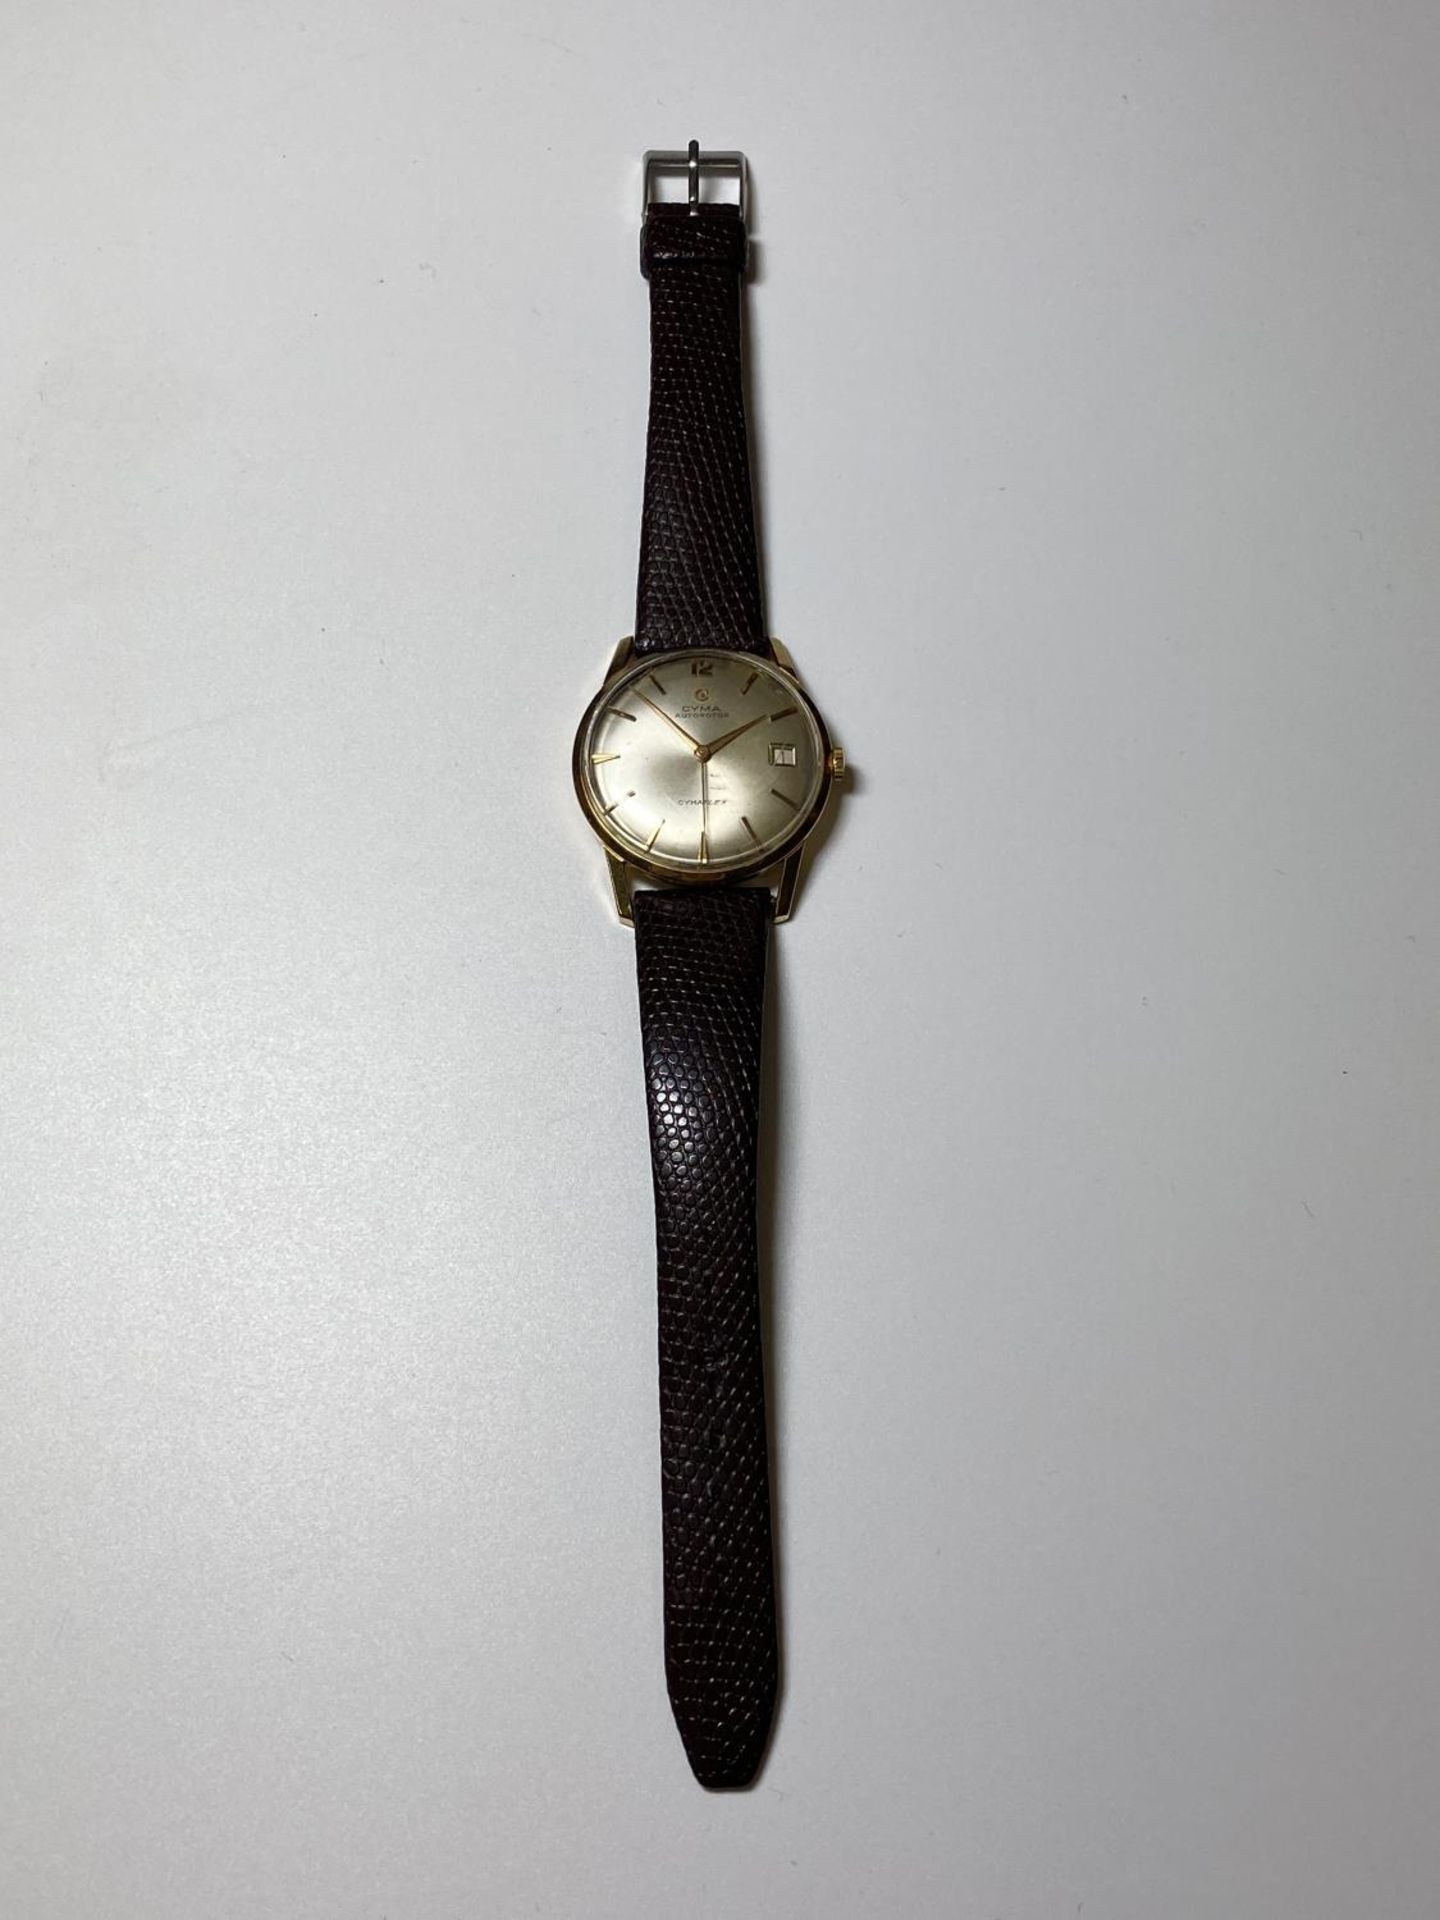 A VINTAGE 1960'S GENTS 9CT GOLD CASED 'CYMA' CYMAFLEX DATE WATCH - Image 3 of 3